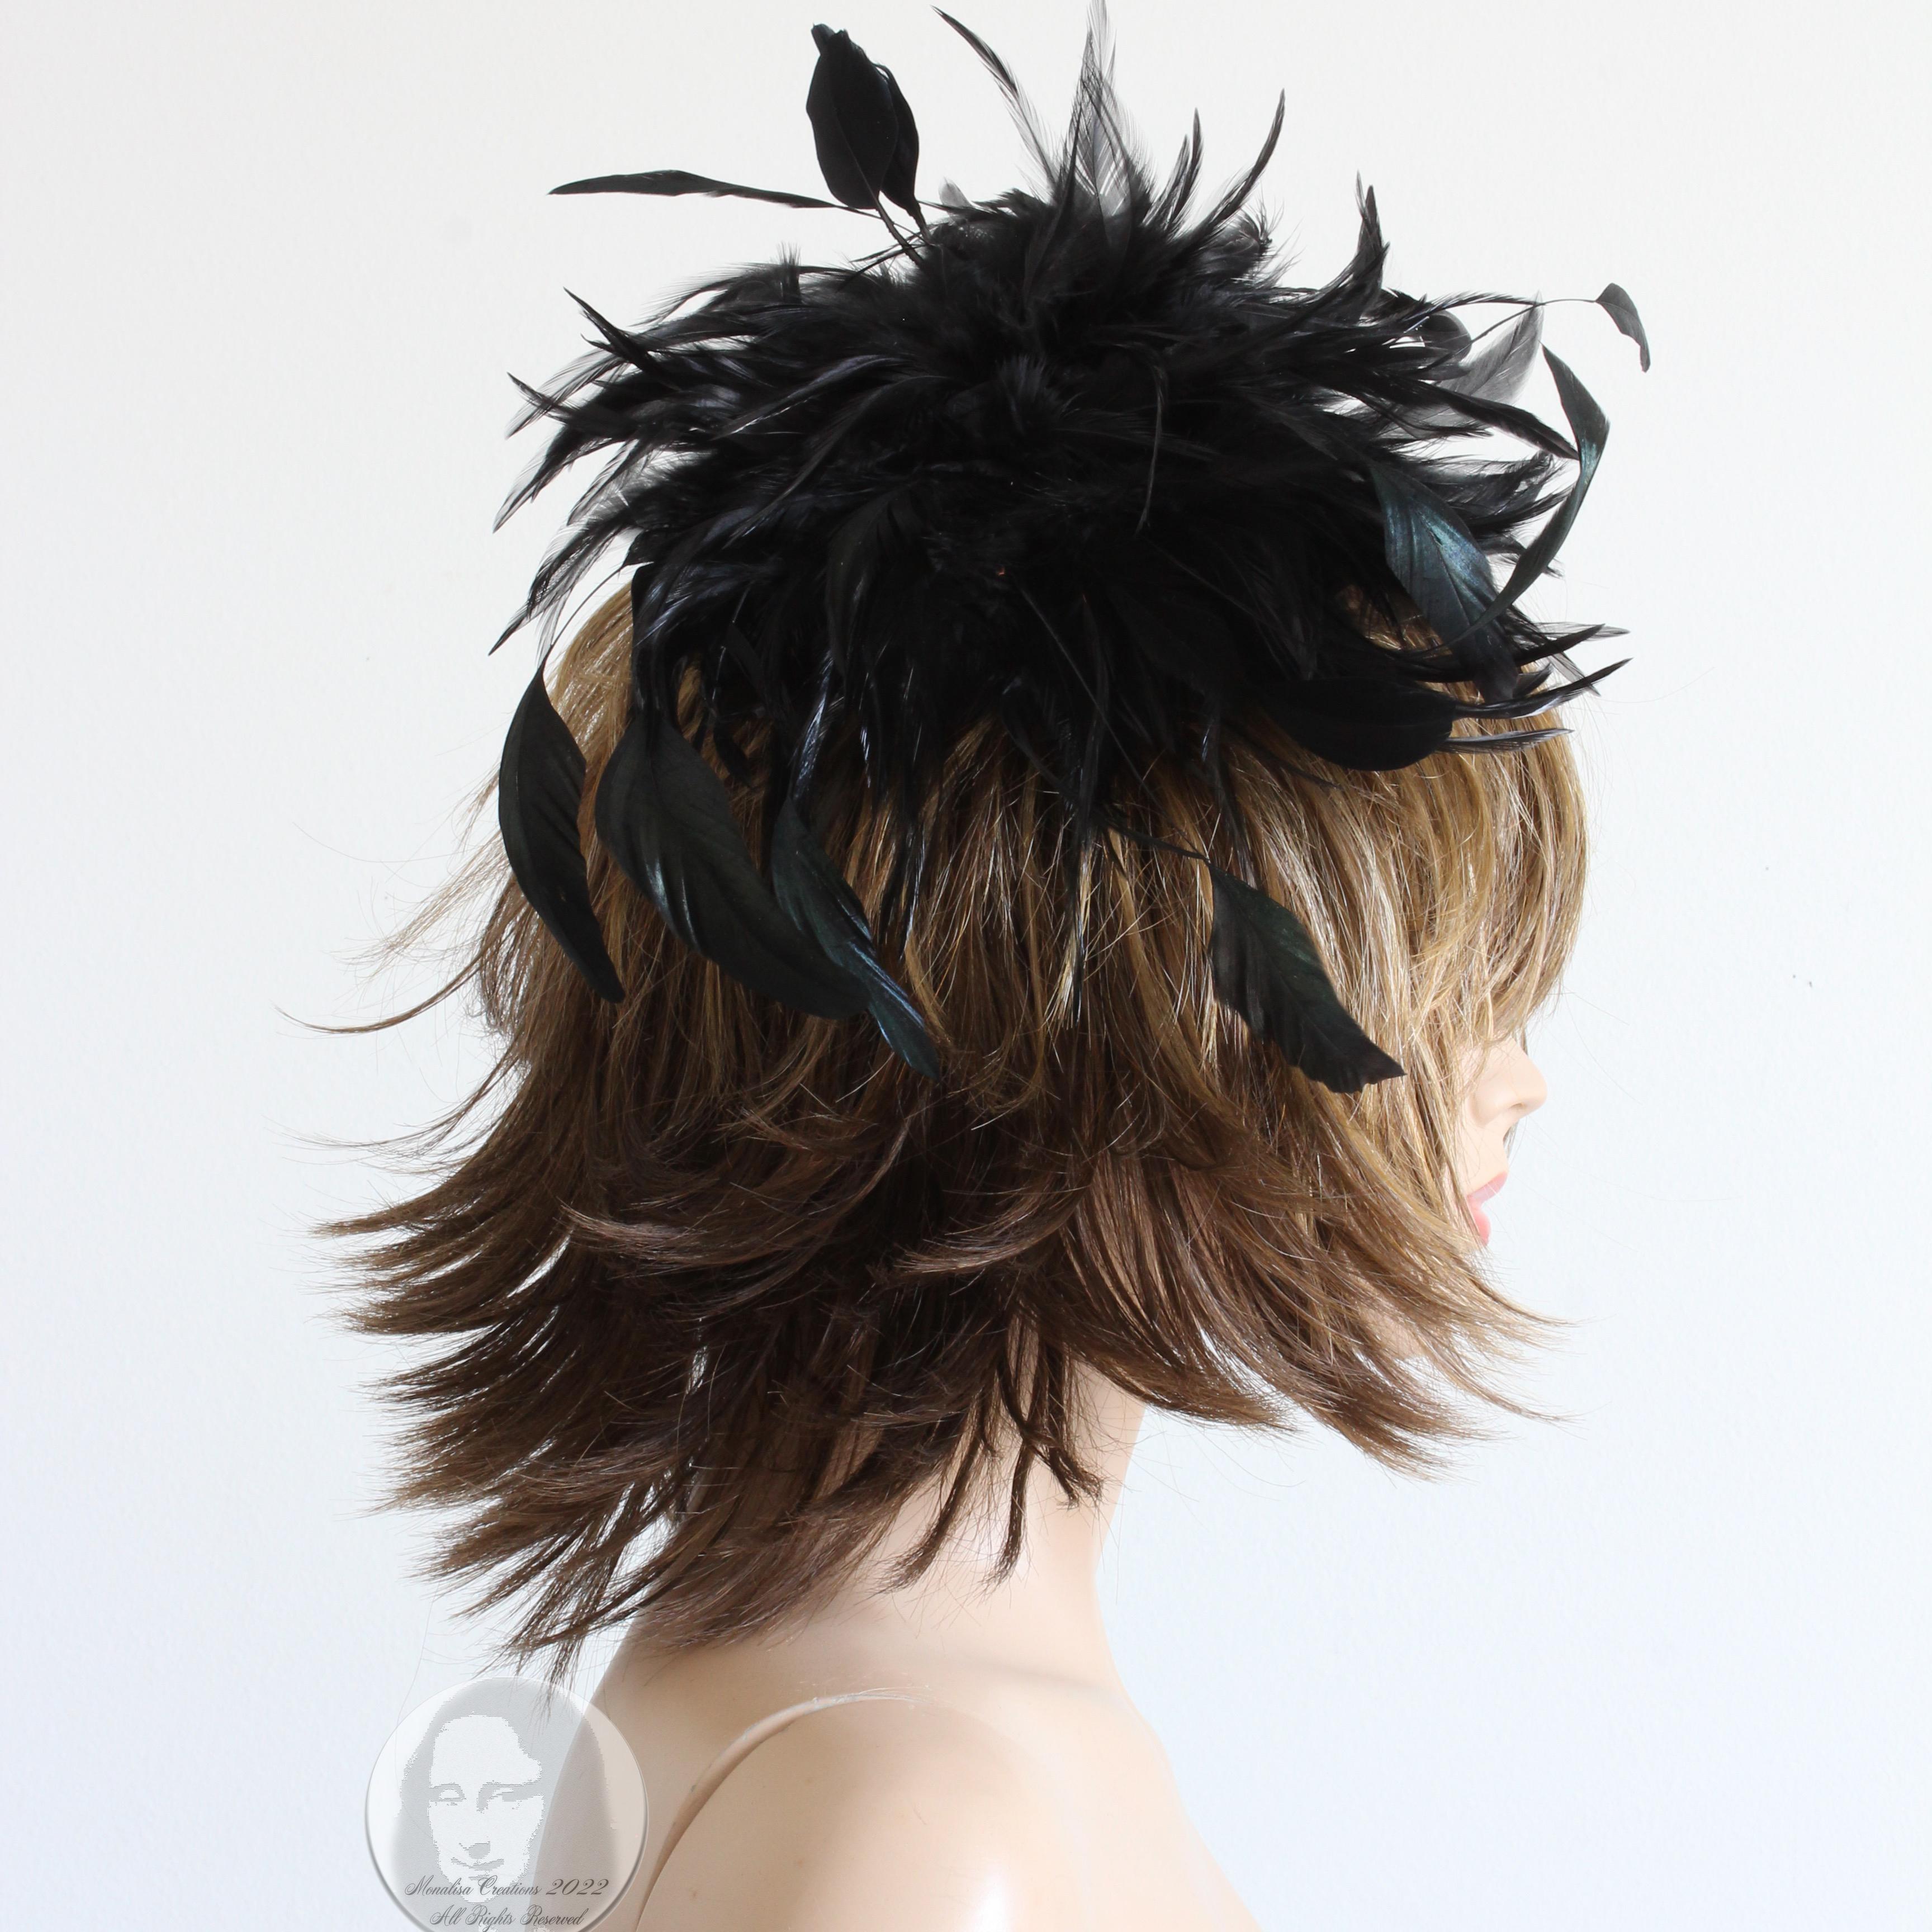 This rare feather cap was made by Yves Saint Laurent, most likely in the late 70s or early 80s. Made from a combination of black ostrich and longer plume feathers with black fabric layers in between, all of which are affixed to a netted fabric base